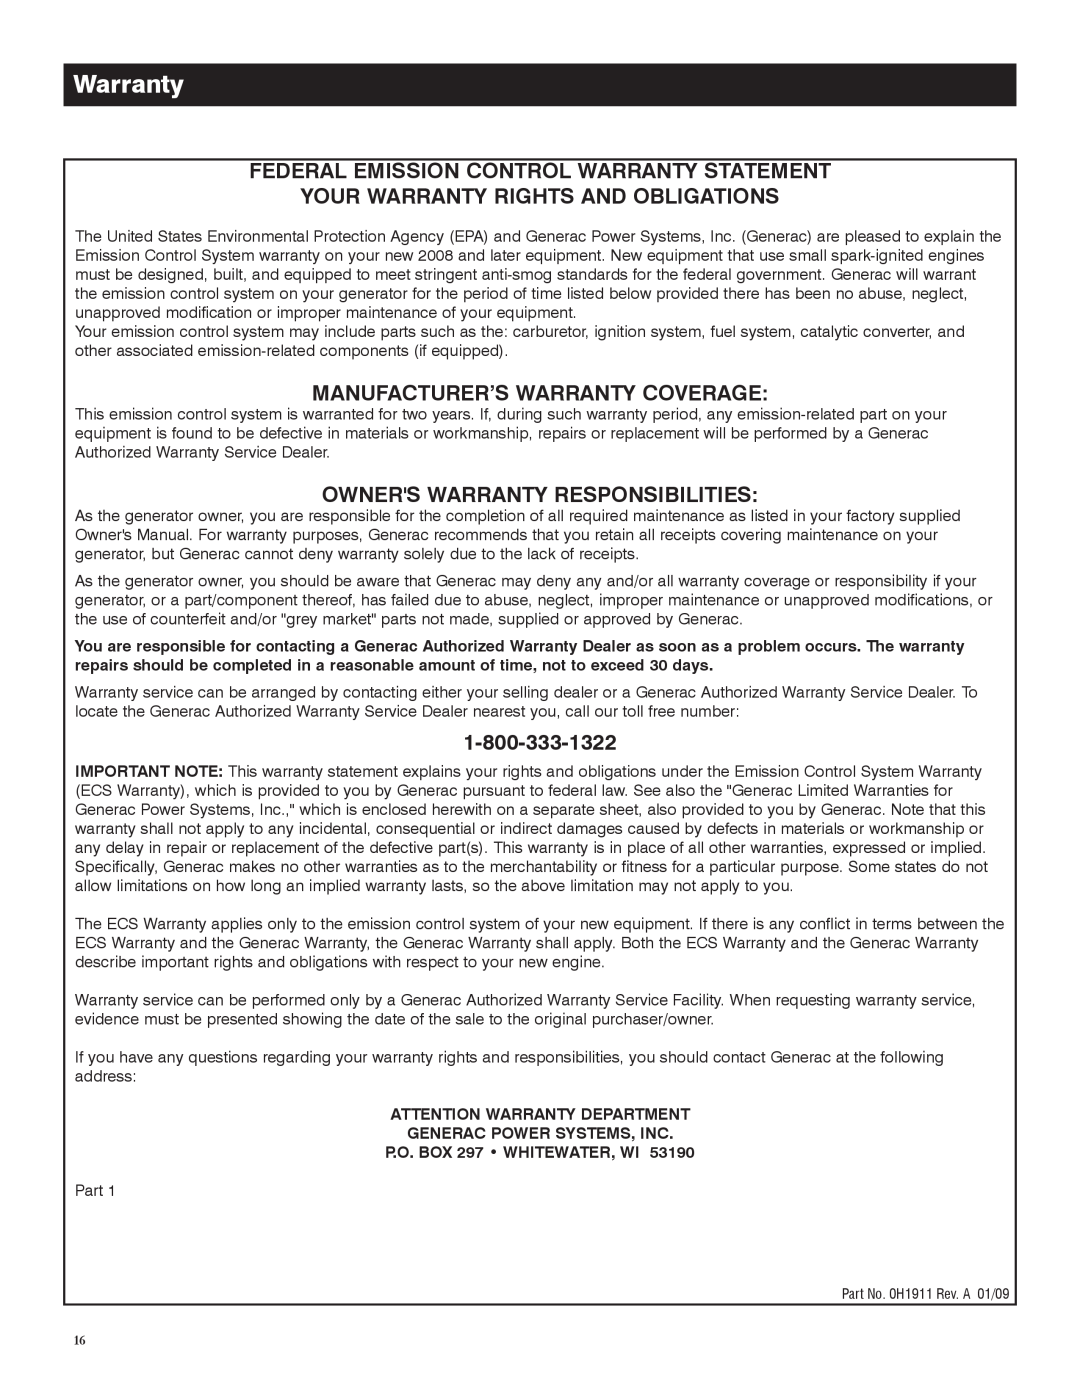 Generac 005982-0, 5982R owner manual Federal Emission Control Warranty Statement, Your Warranty Rights And Obligations 